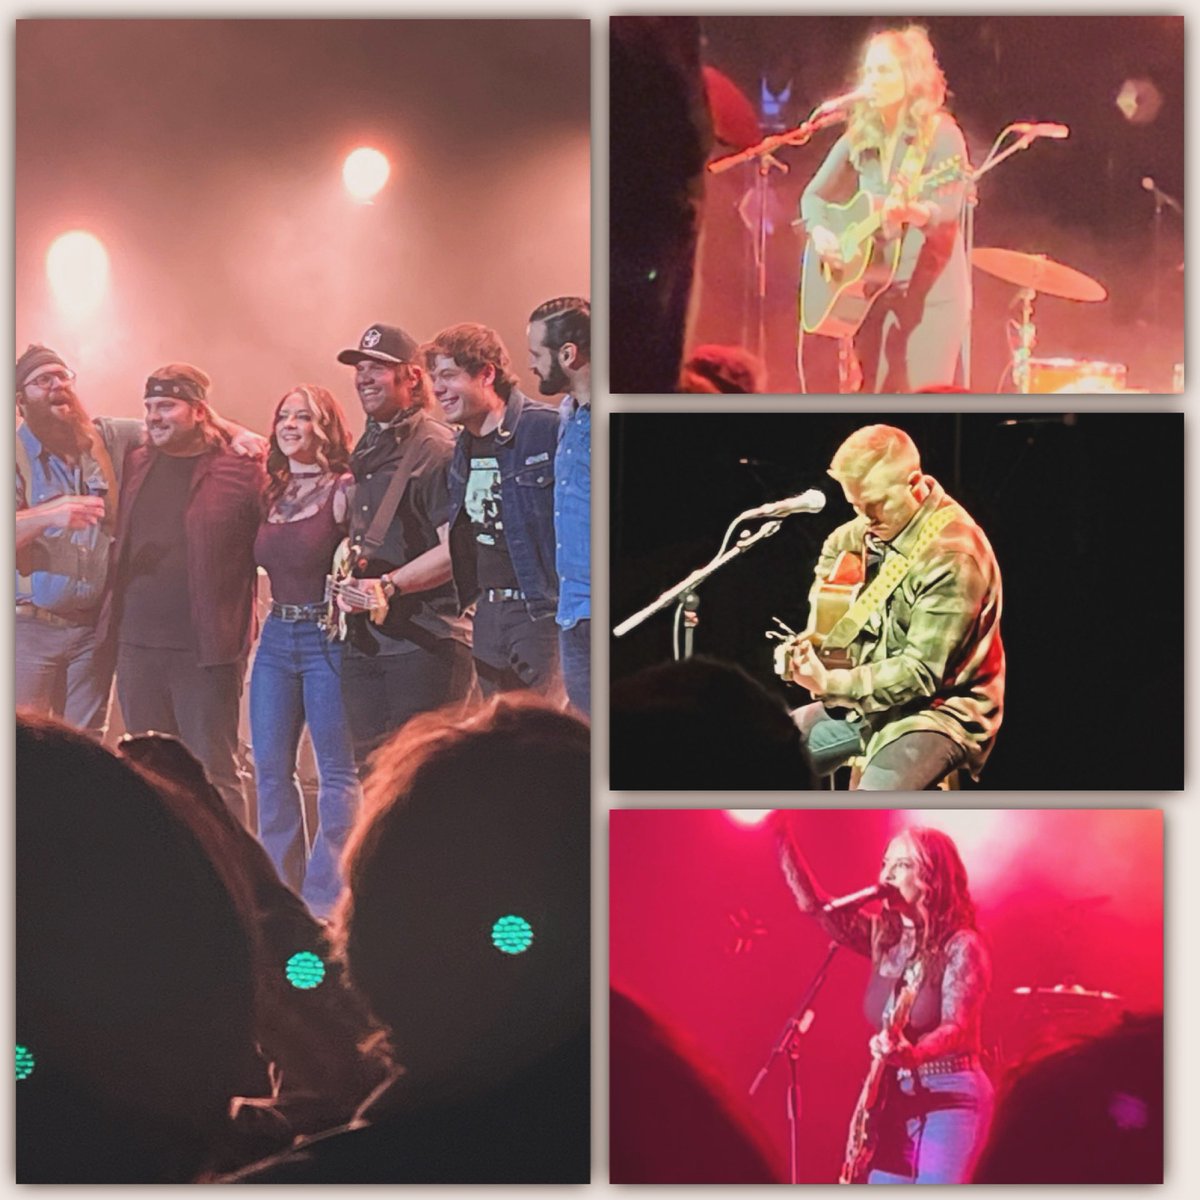 Still can’t believe this was last week 😍 great night and incredible performances 🎸 @AshleyMcBryde @COREYKENT @HarperOneill 🔥 #TheDevilIKnowTour #London #CountryMusic